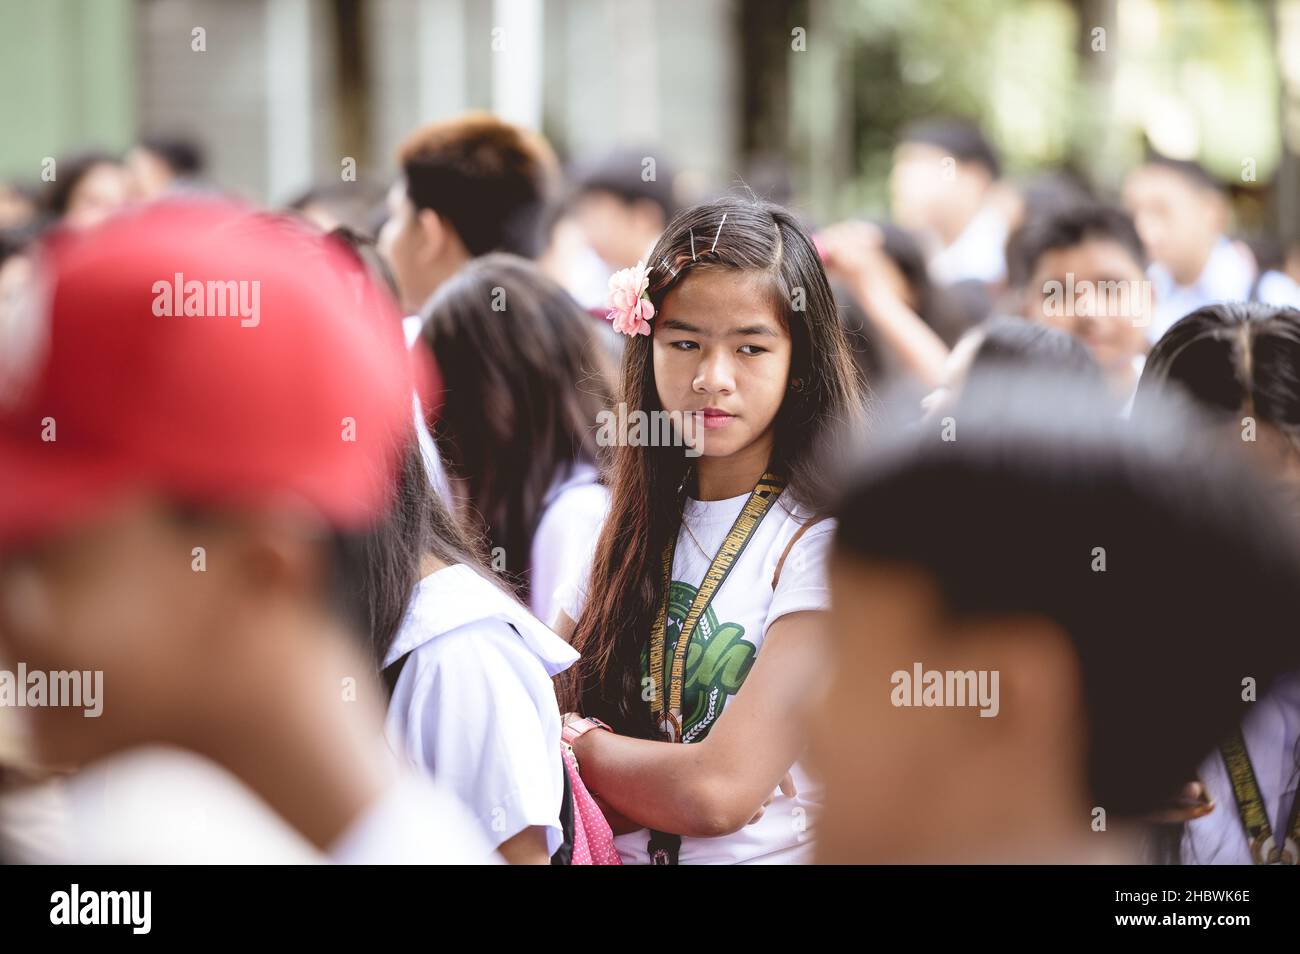 SCHOOL CHILDREN IN A FILIPINO SCHOOL WAITING FOR CLASS, PHILIPPINES - Jan 01, 2019: A group of Filipino school children waiting for class to start Stock Photo